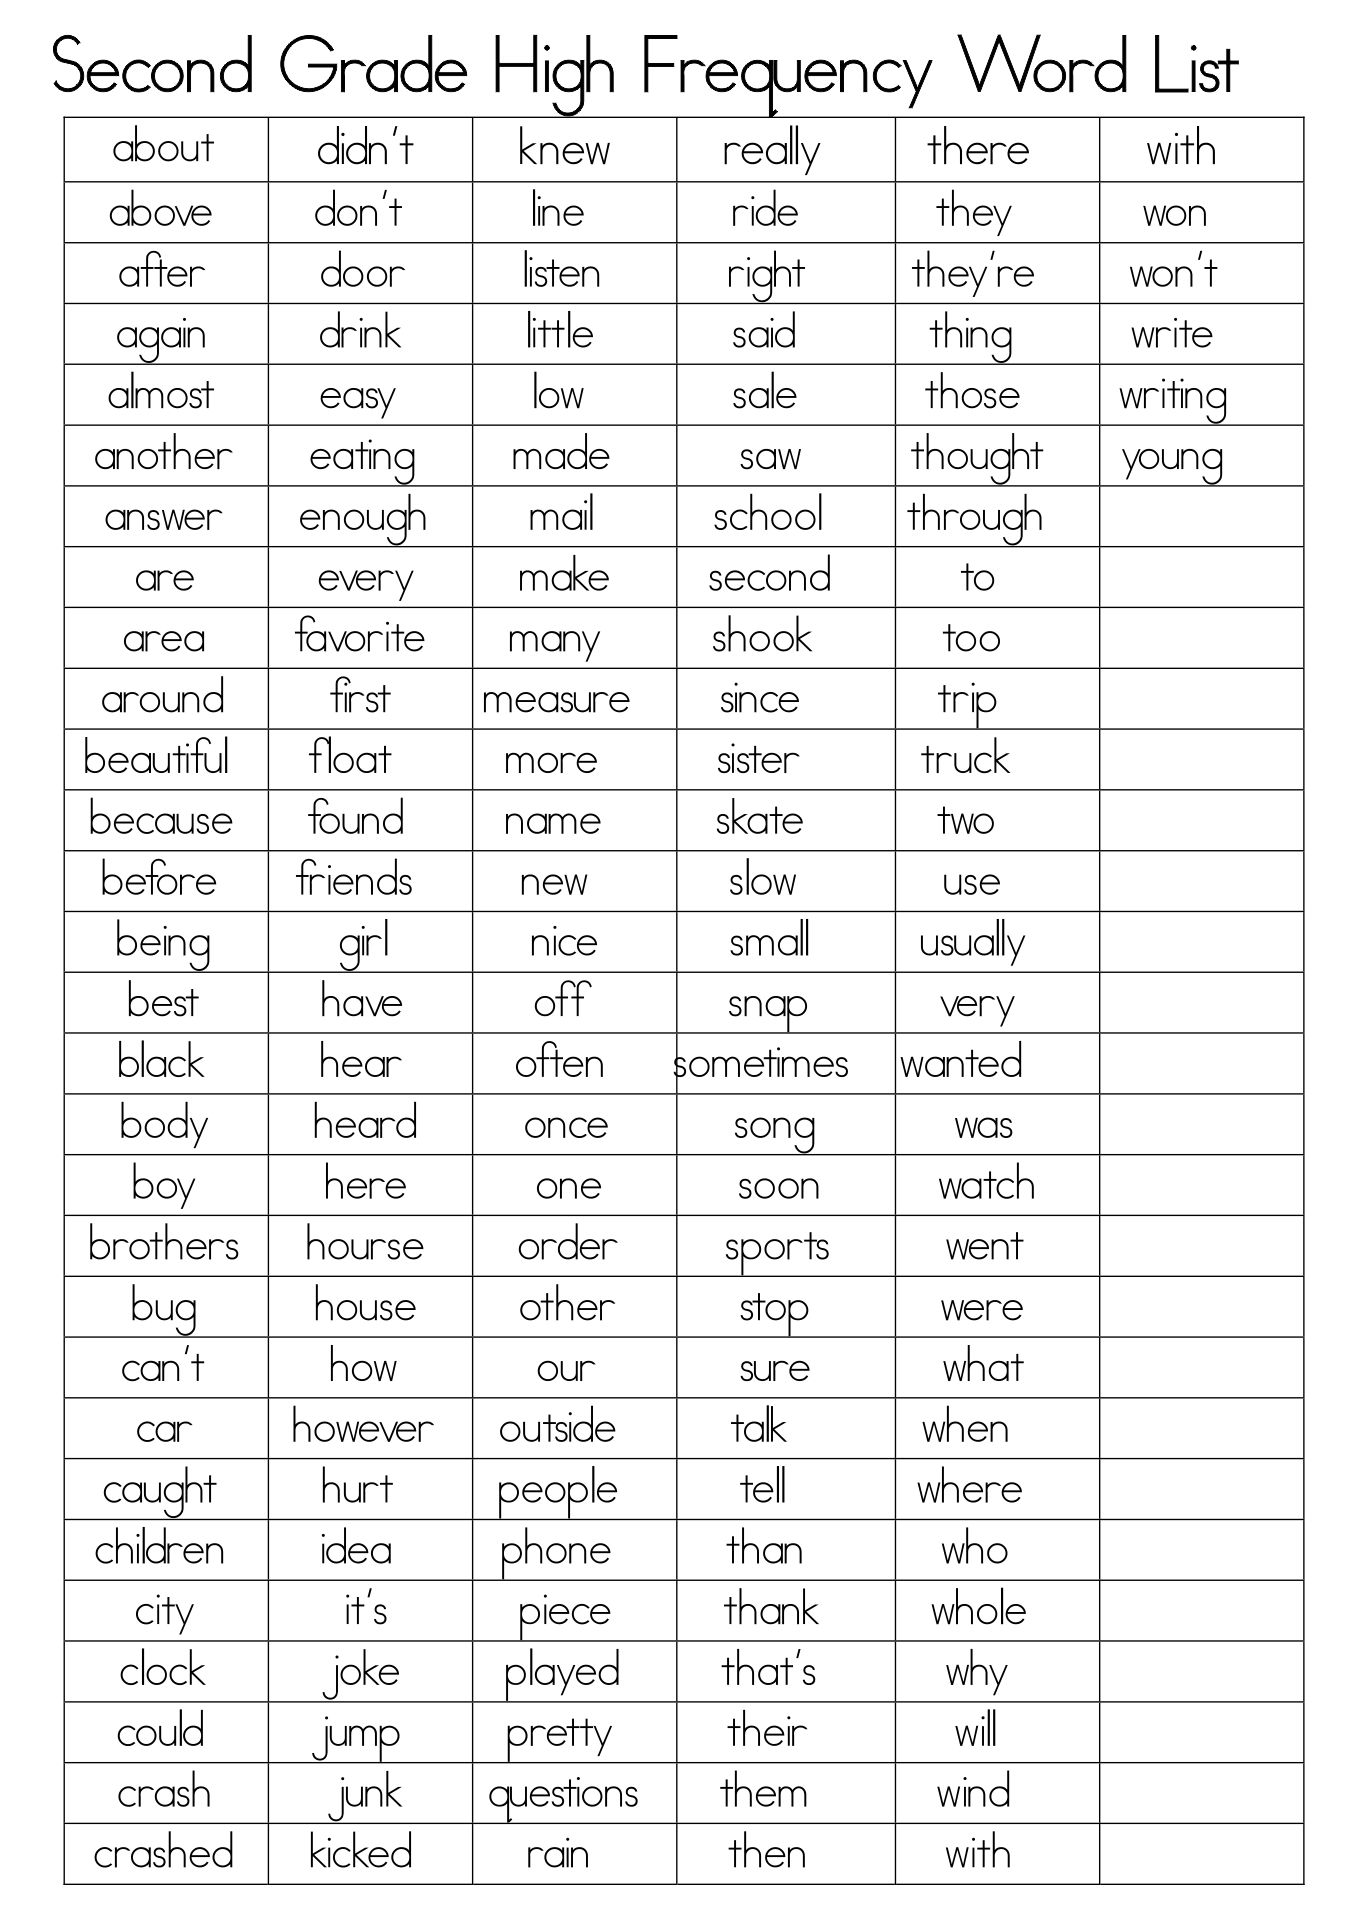 dolch-sight-words-worksheets